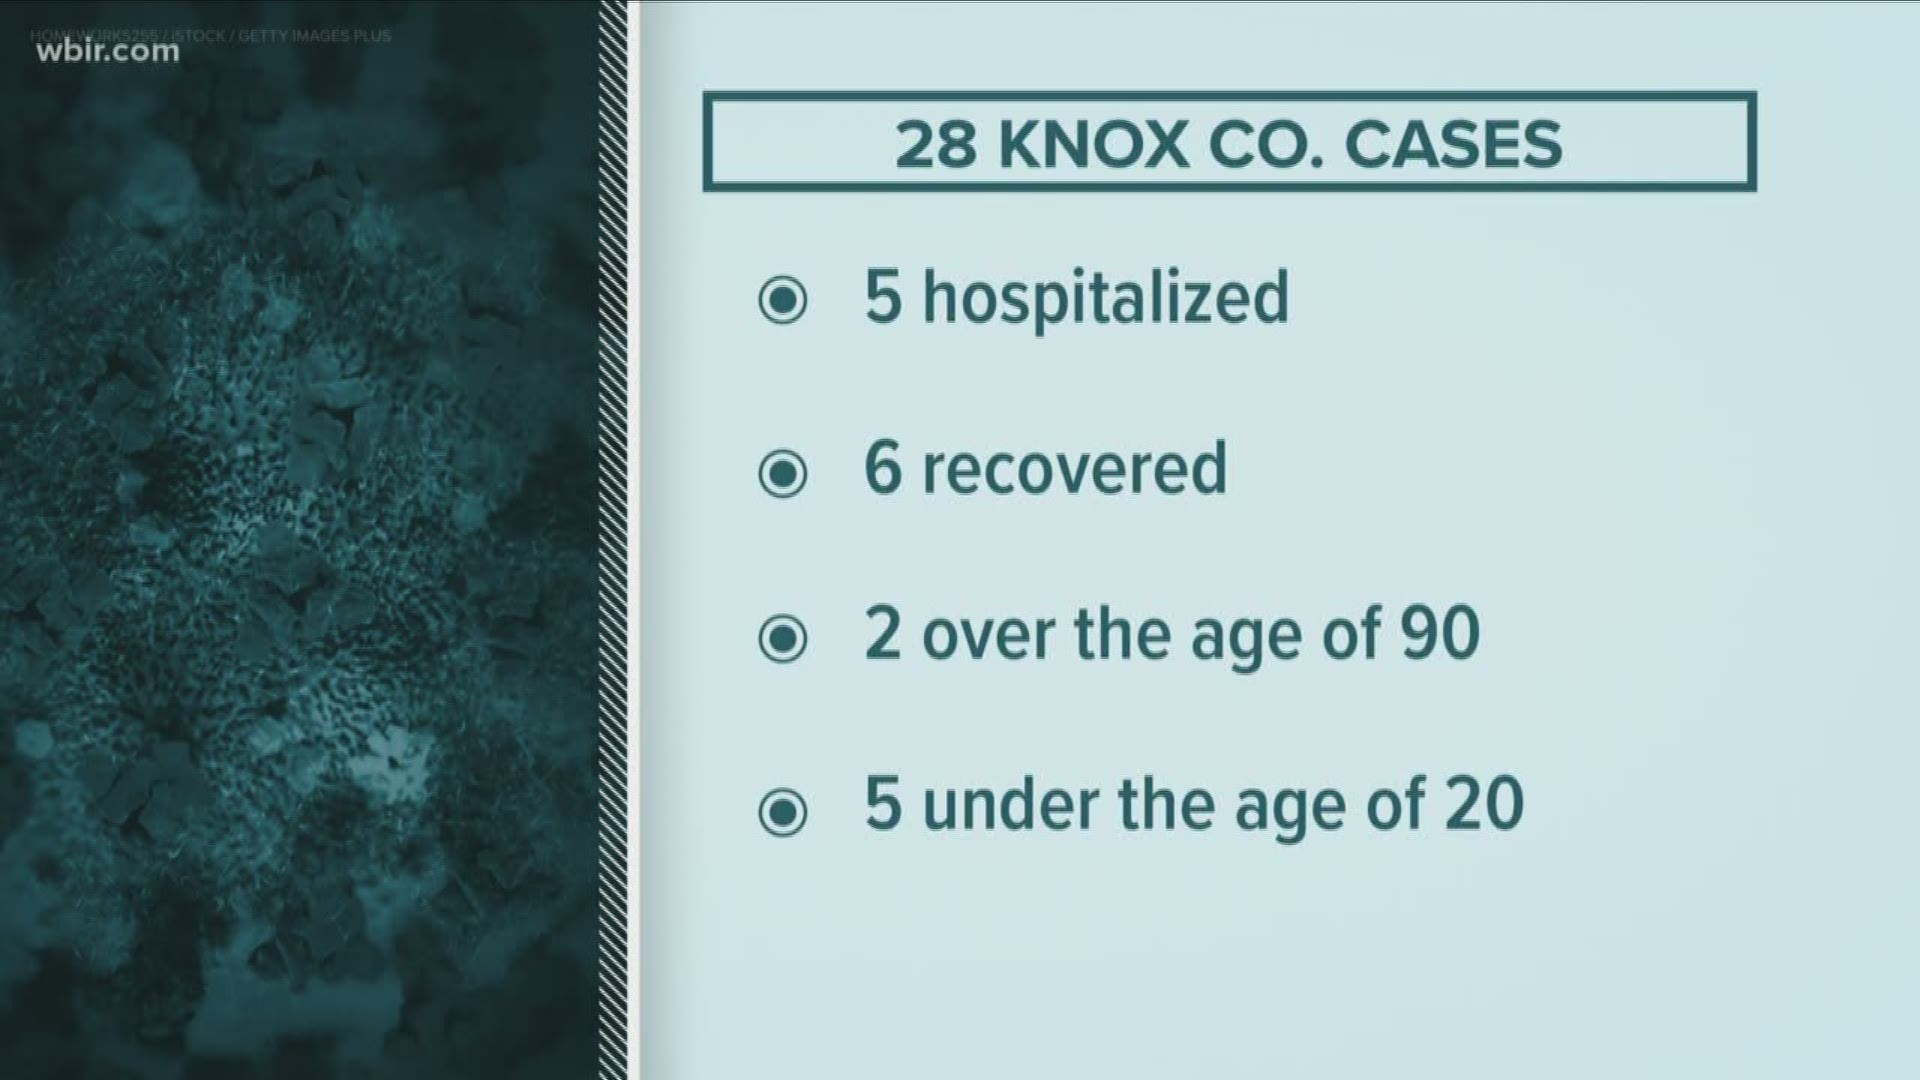 The Knox County Health Department some of the community's questions on Thursday, especially those regarding COVID-19 spreading in homeless communities.